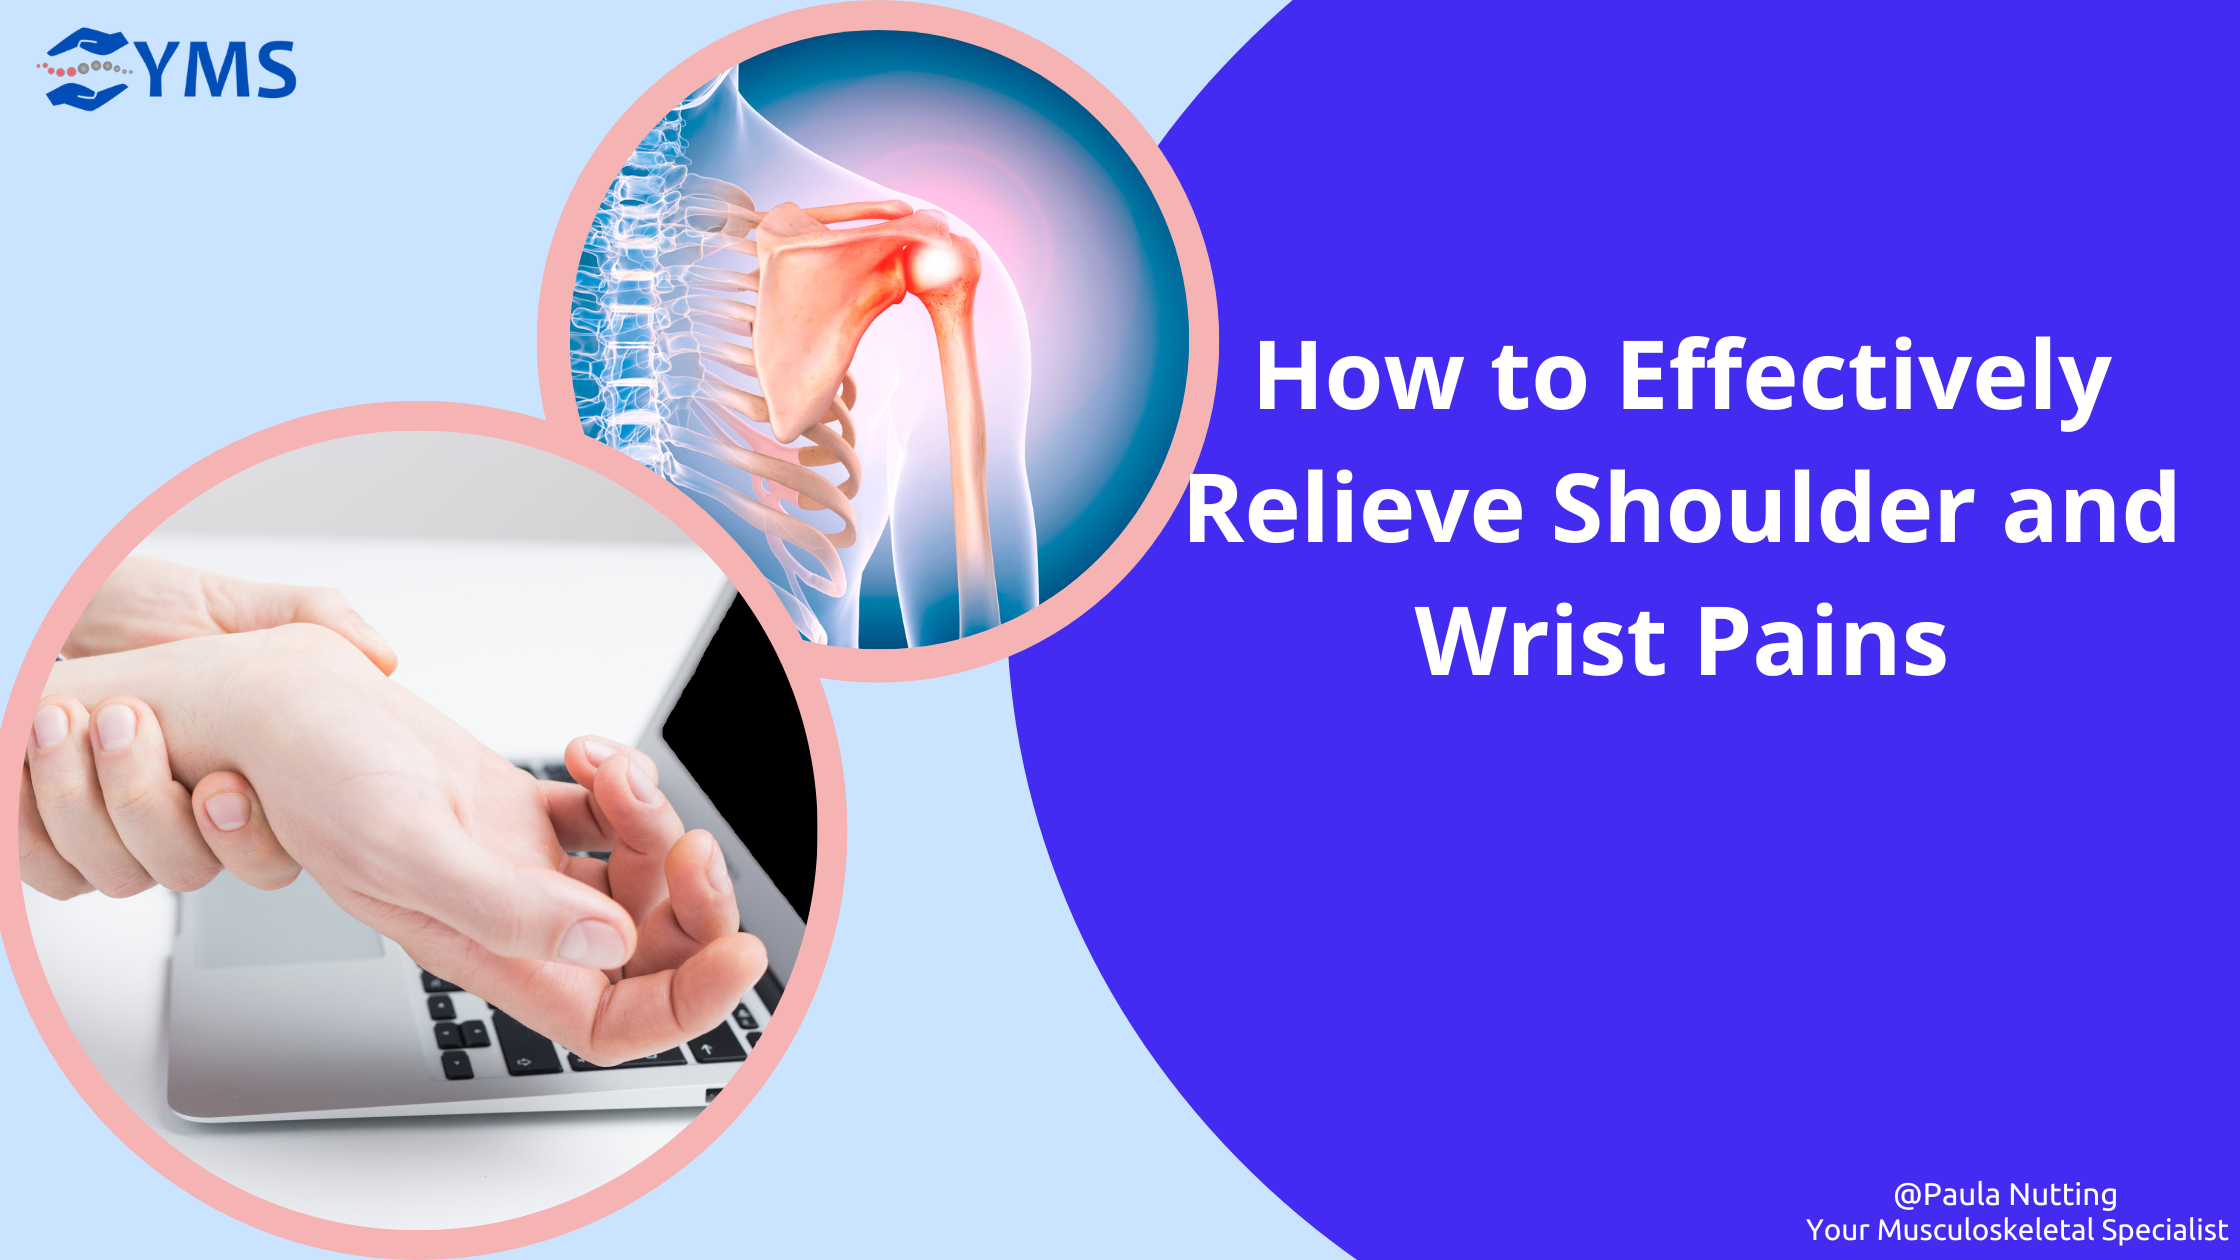 https://www.yourmusculoskeletalspecialist.com/wp-content/uploads/How-to-Effectively-Relieve-Shoulder-and-Wrist-Pains.png